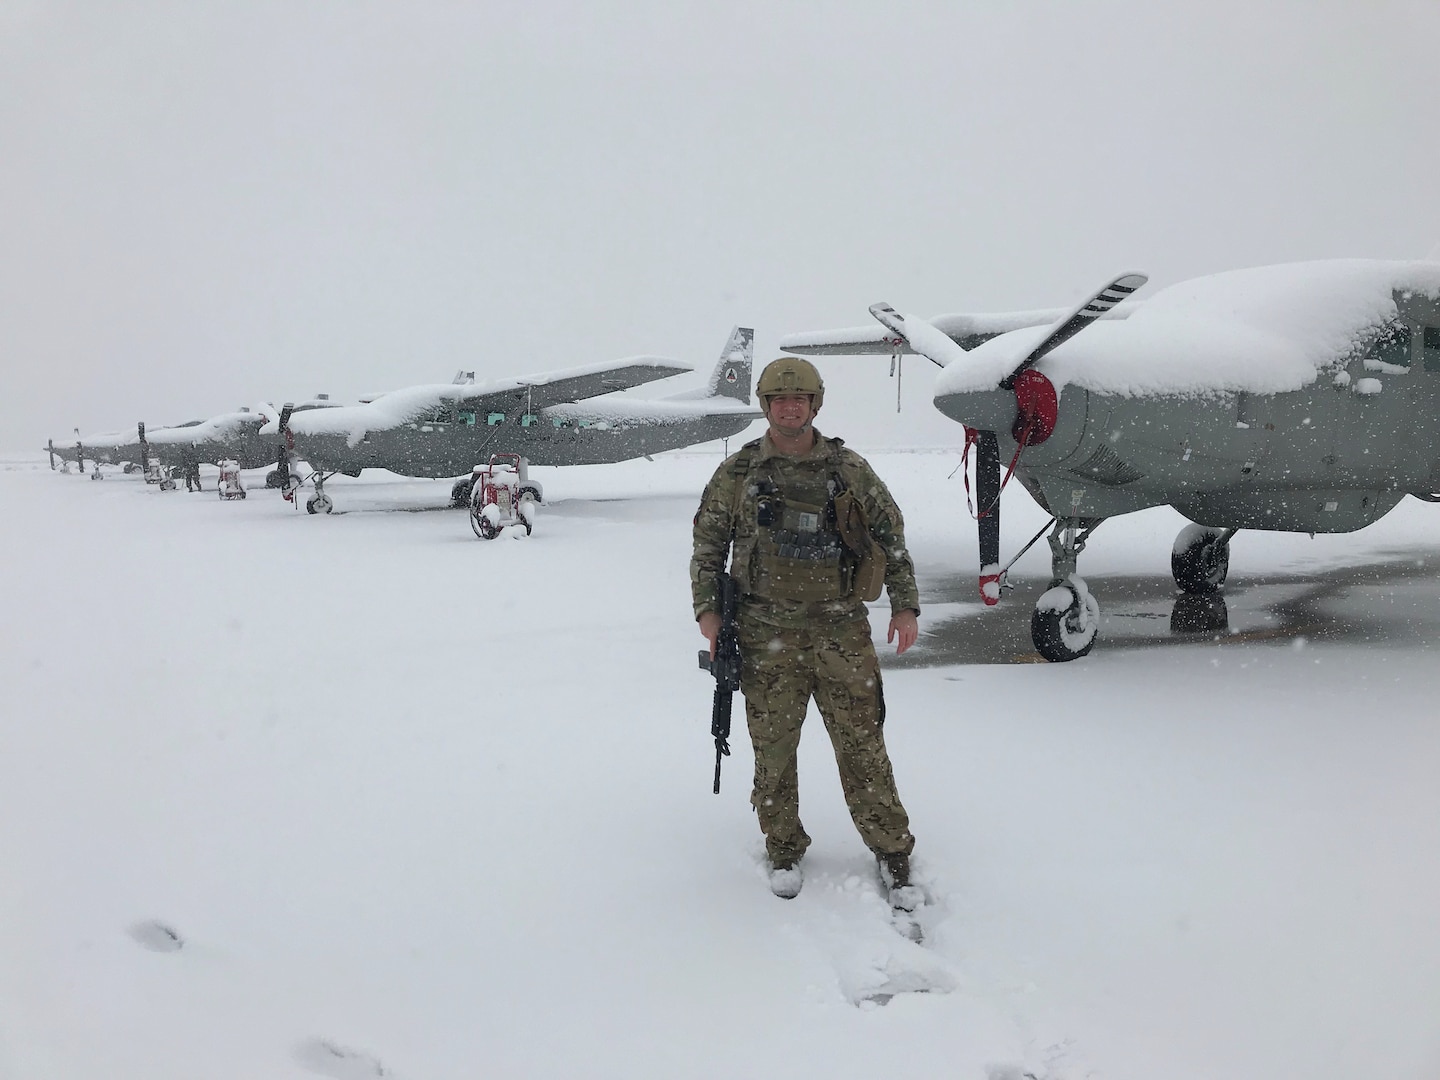 U.S. Air Force Lt. Col. Carl Miller, 538th Air Expeditionary Advisory Squadron commander, stands next to Afghan air force C-208 Caravans on the flightline at Hamid Karzai International Airport in Kabul, Afghanistan in January 2019.  While deployed, Miller advised the entire AAF Kabul Wing operations group, including six major weapons systems, 86 aircraft, six squadrons and 201 aircrew members, helping earn him a 2019 Air Force Lance P. Sijan Leadership Award. (Courtesy Photo)